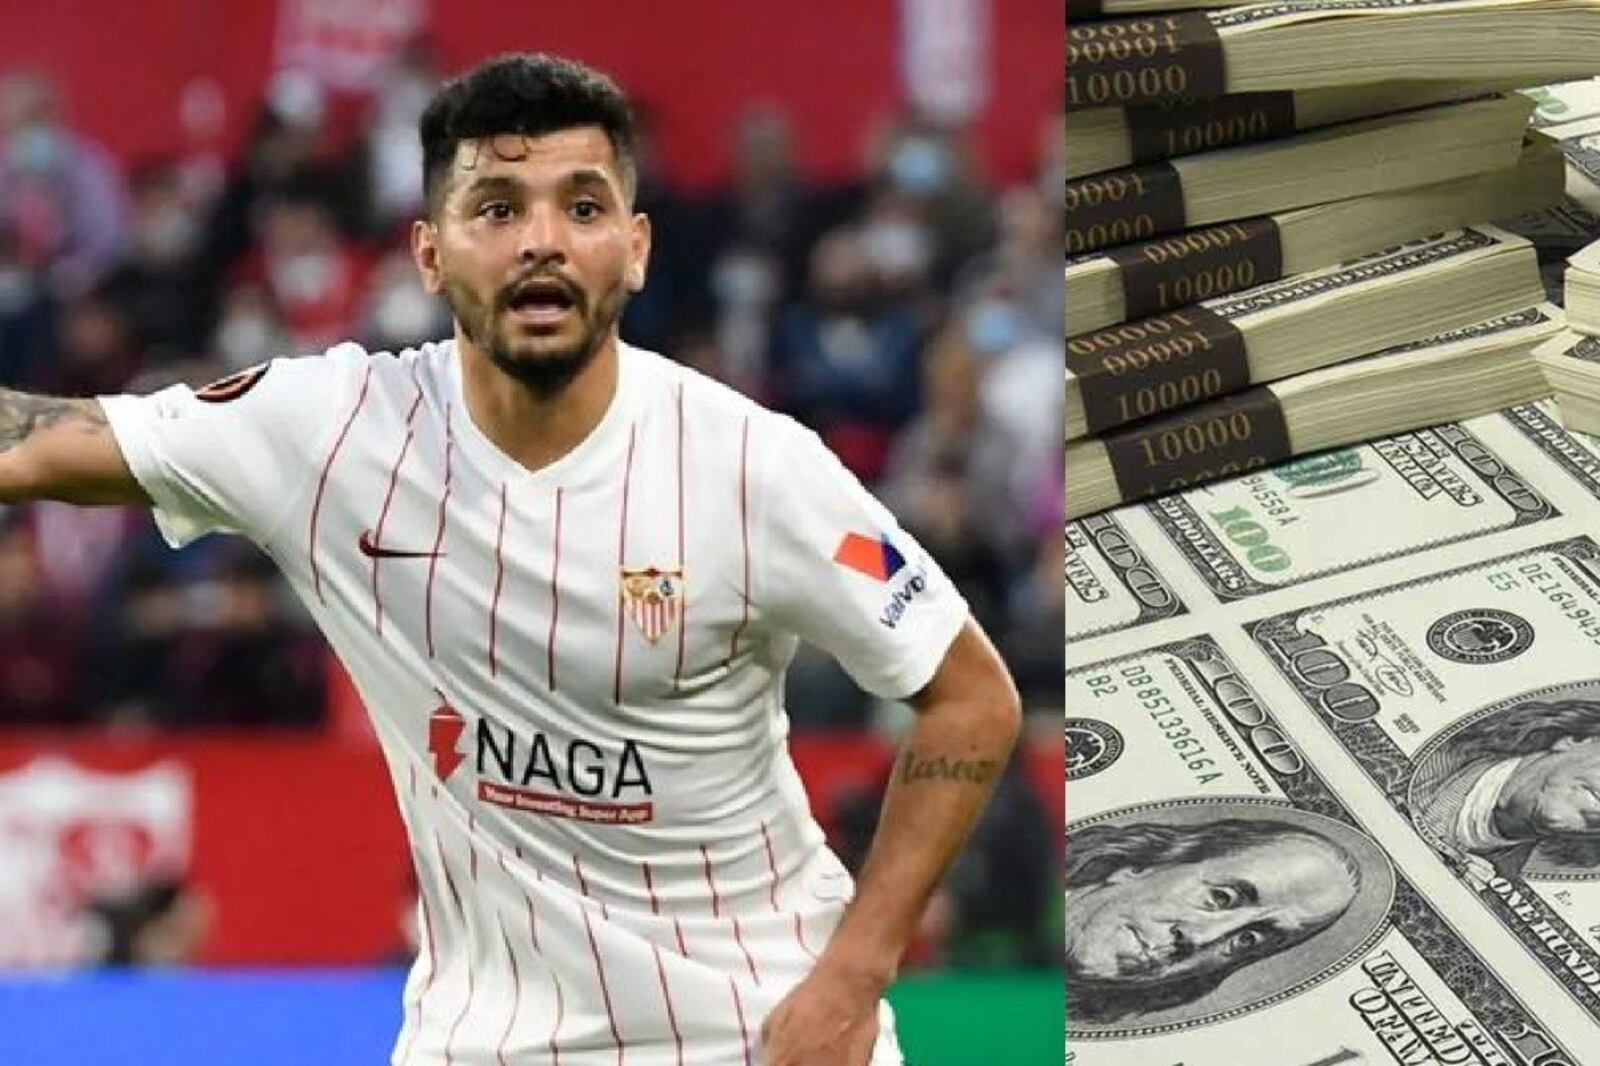 The millions of euros that Tecatito Corona has been devalued for not playing with Sevilla